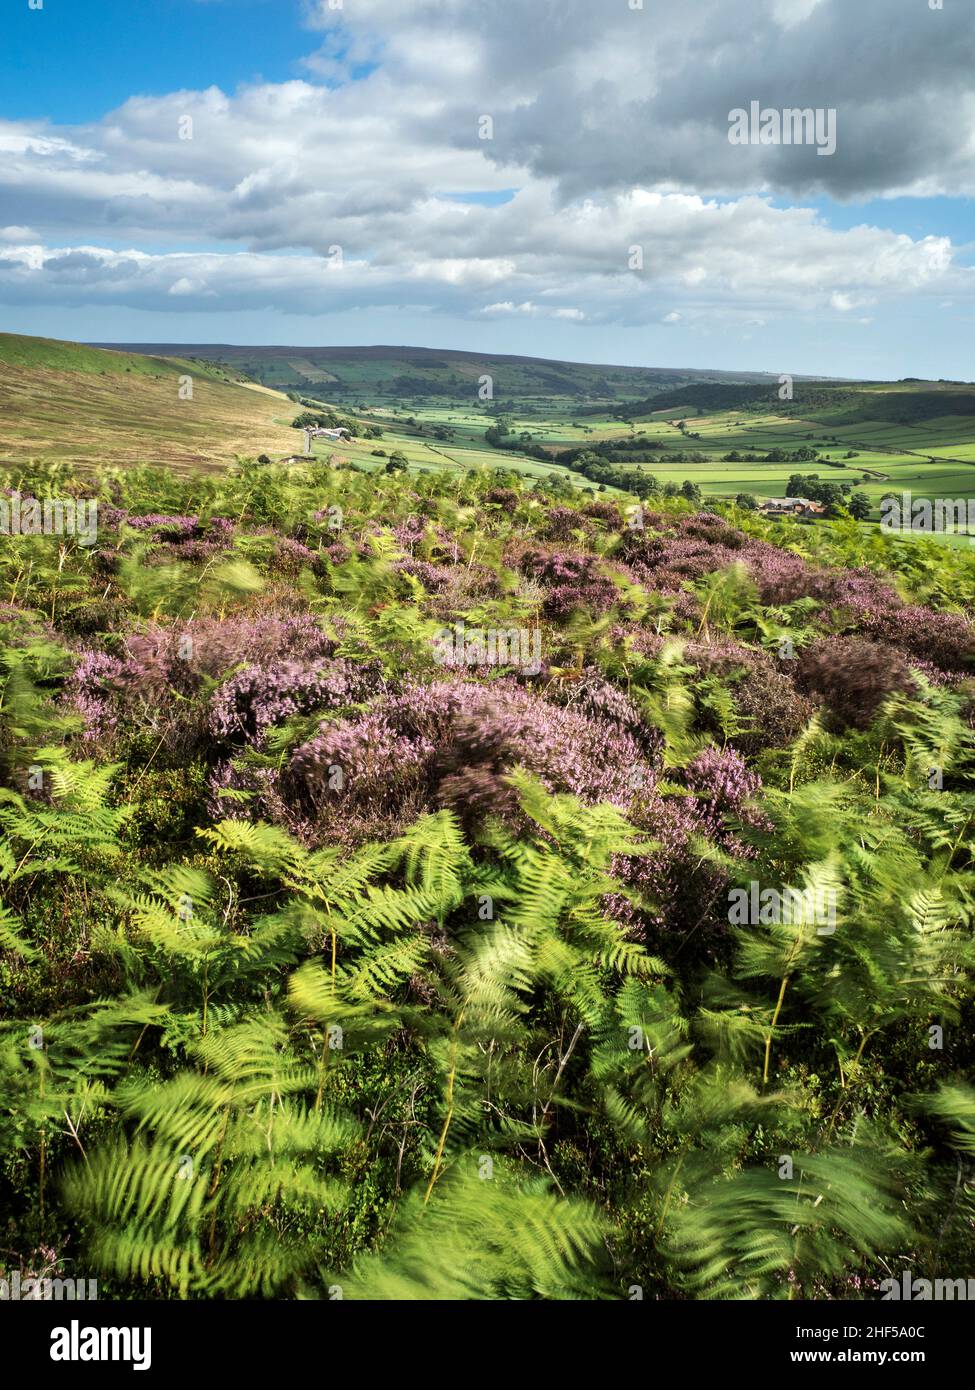 Little Fryupdale, North Yorks Moors National Park, Yorkshire Stock Photo